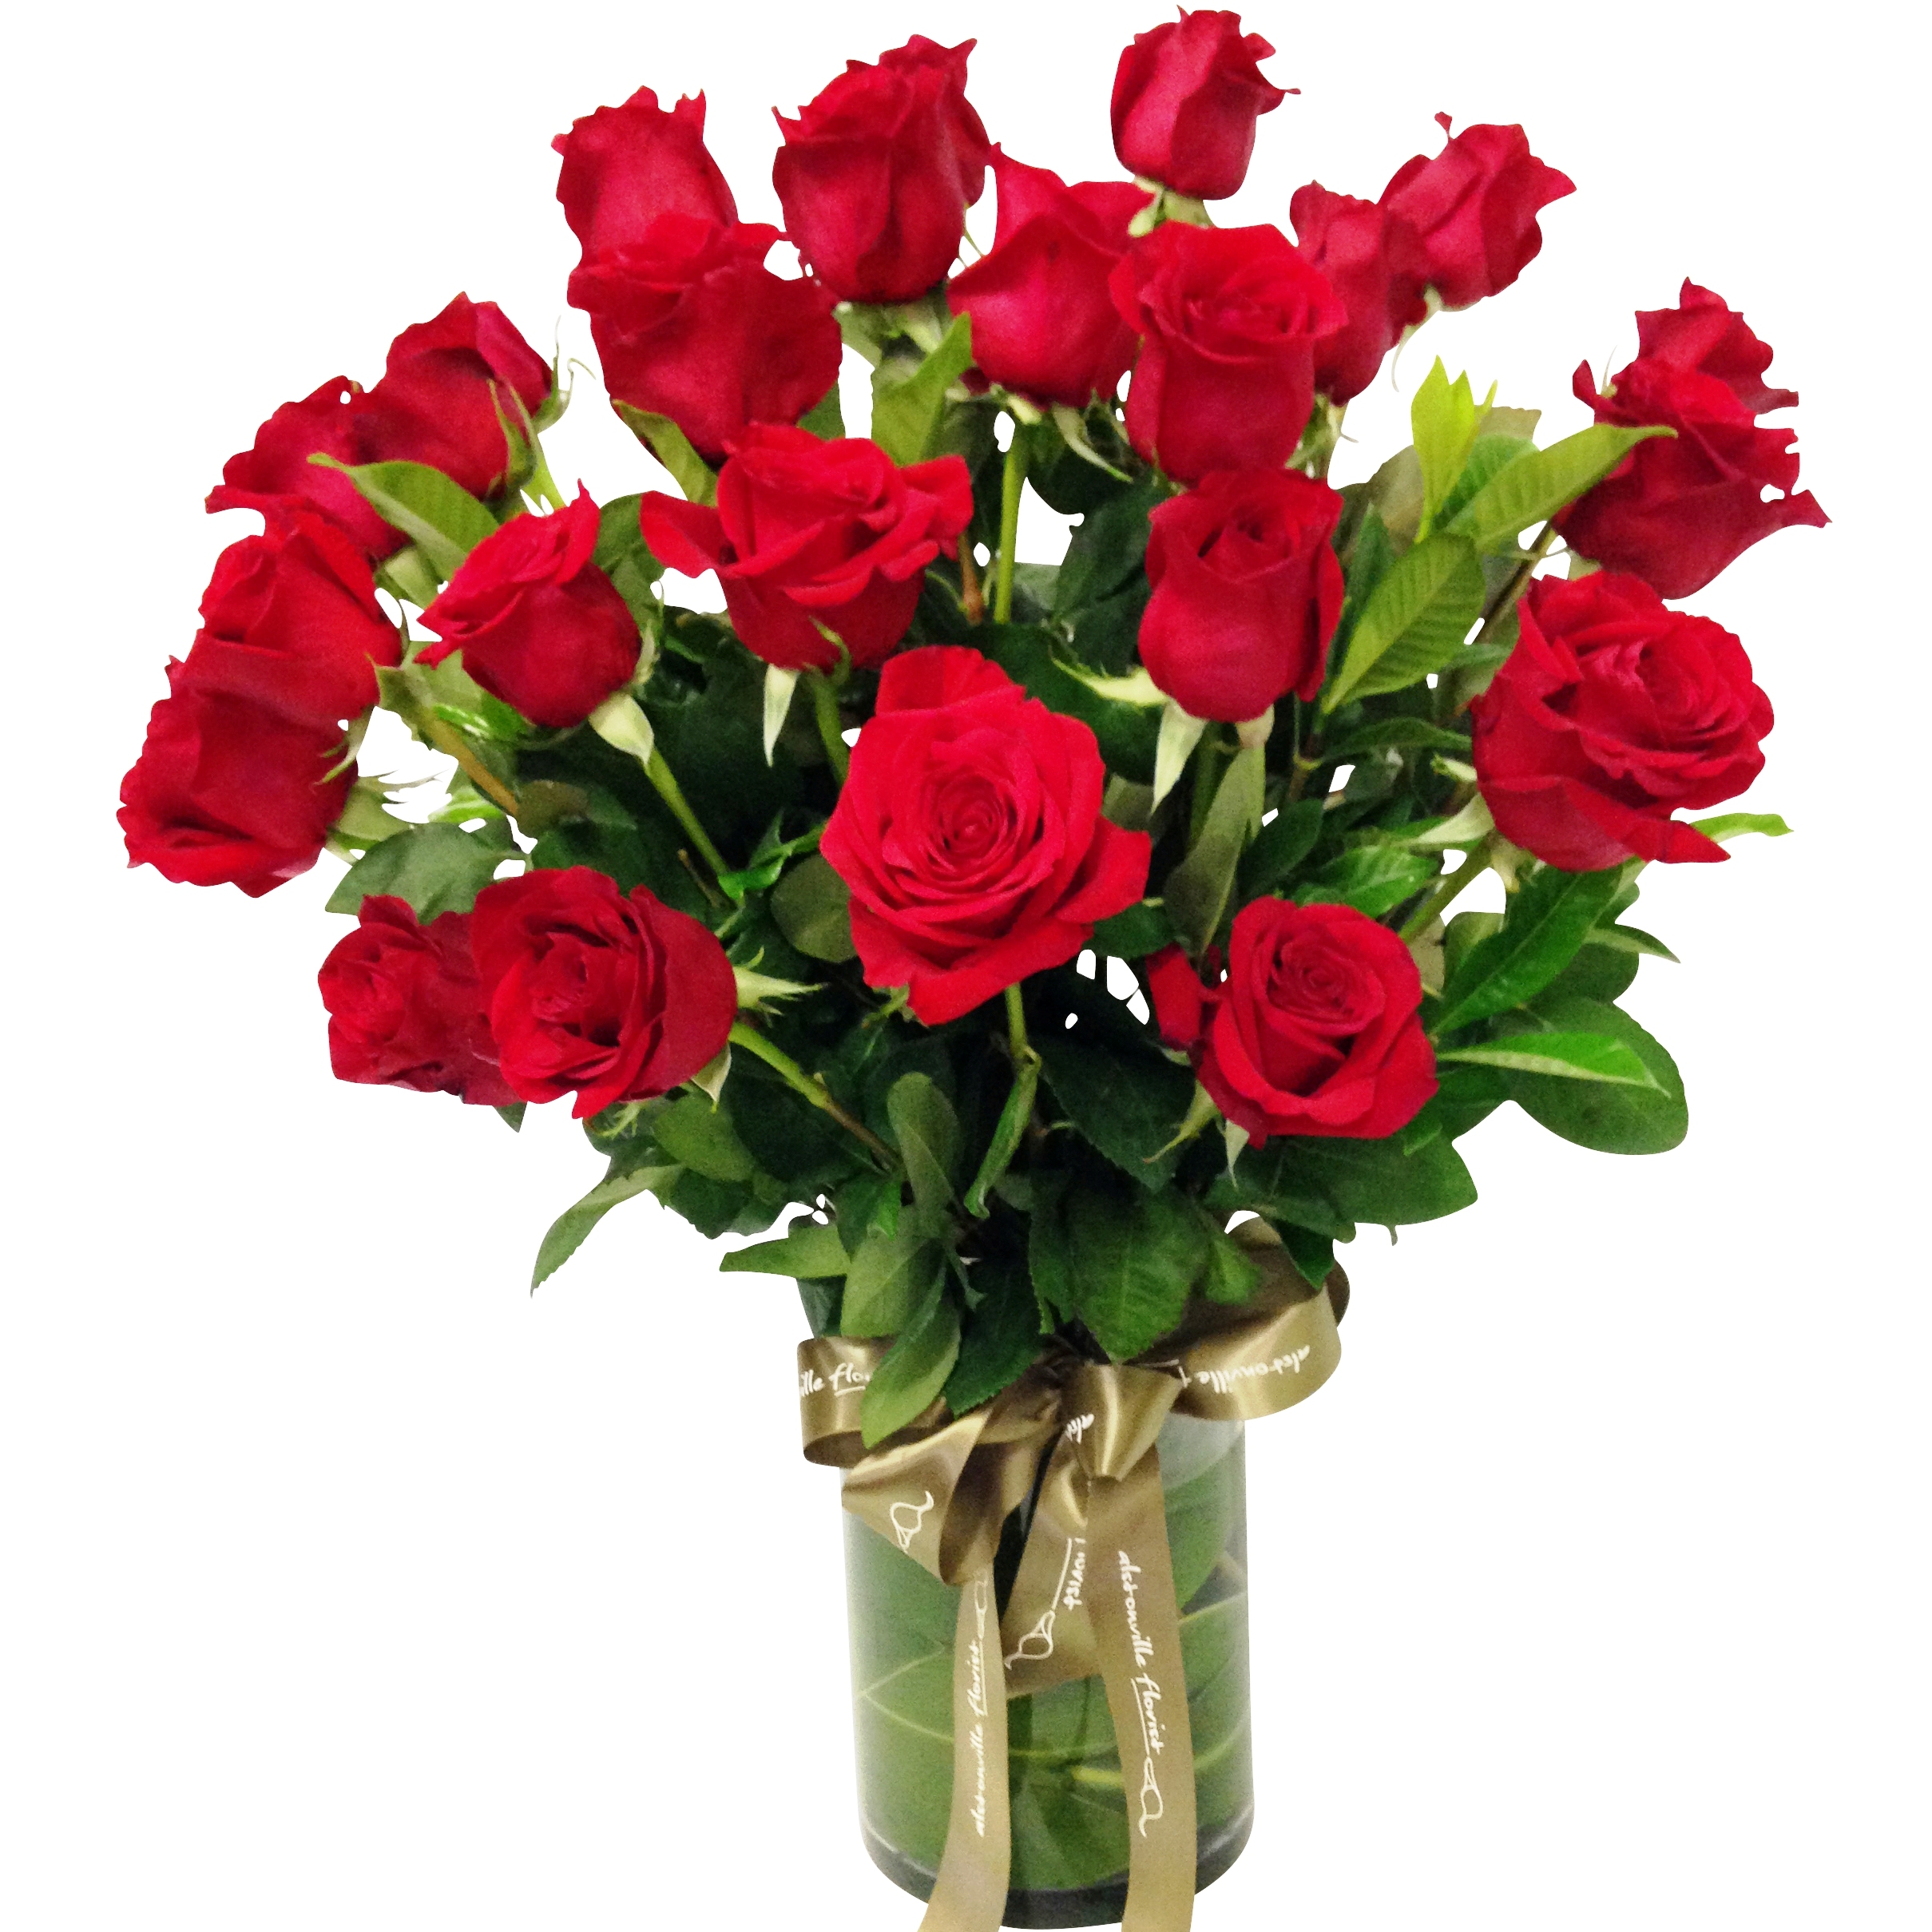 Red Roses in a Vase, 12 or 24 Premium Red Roses